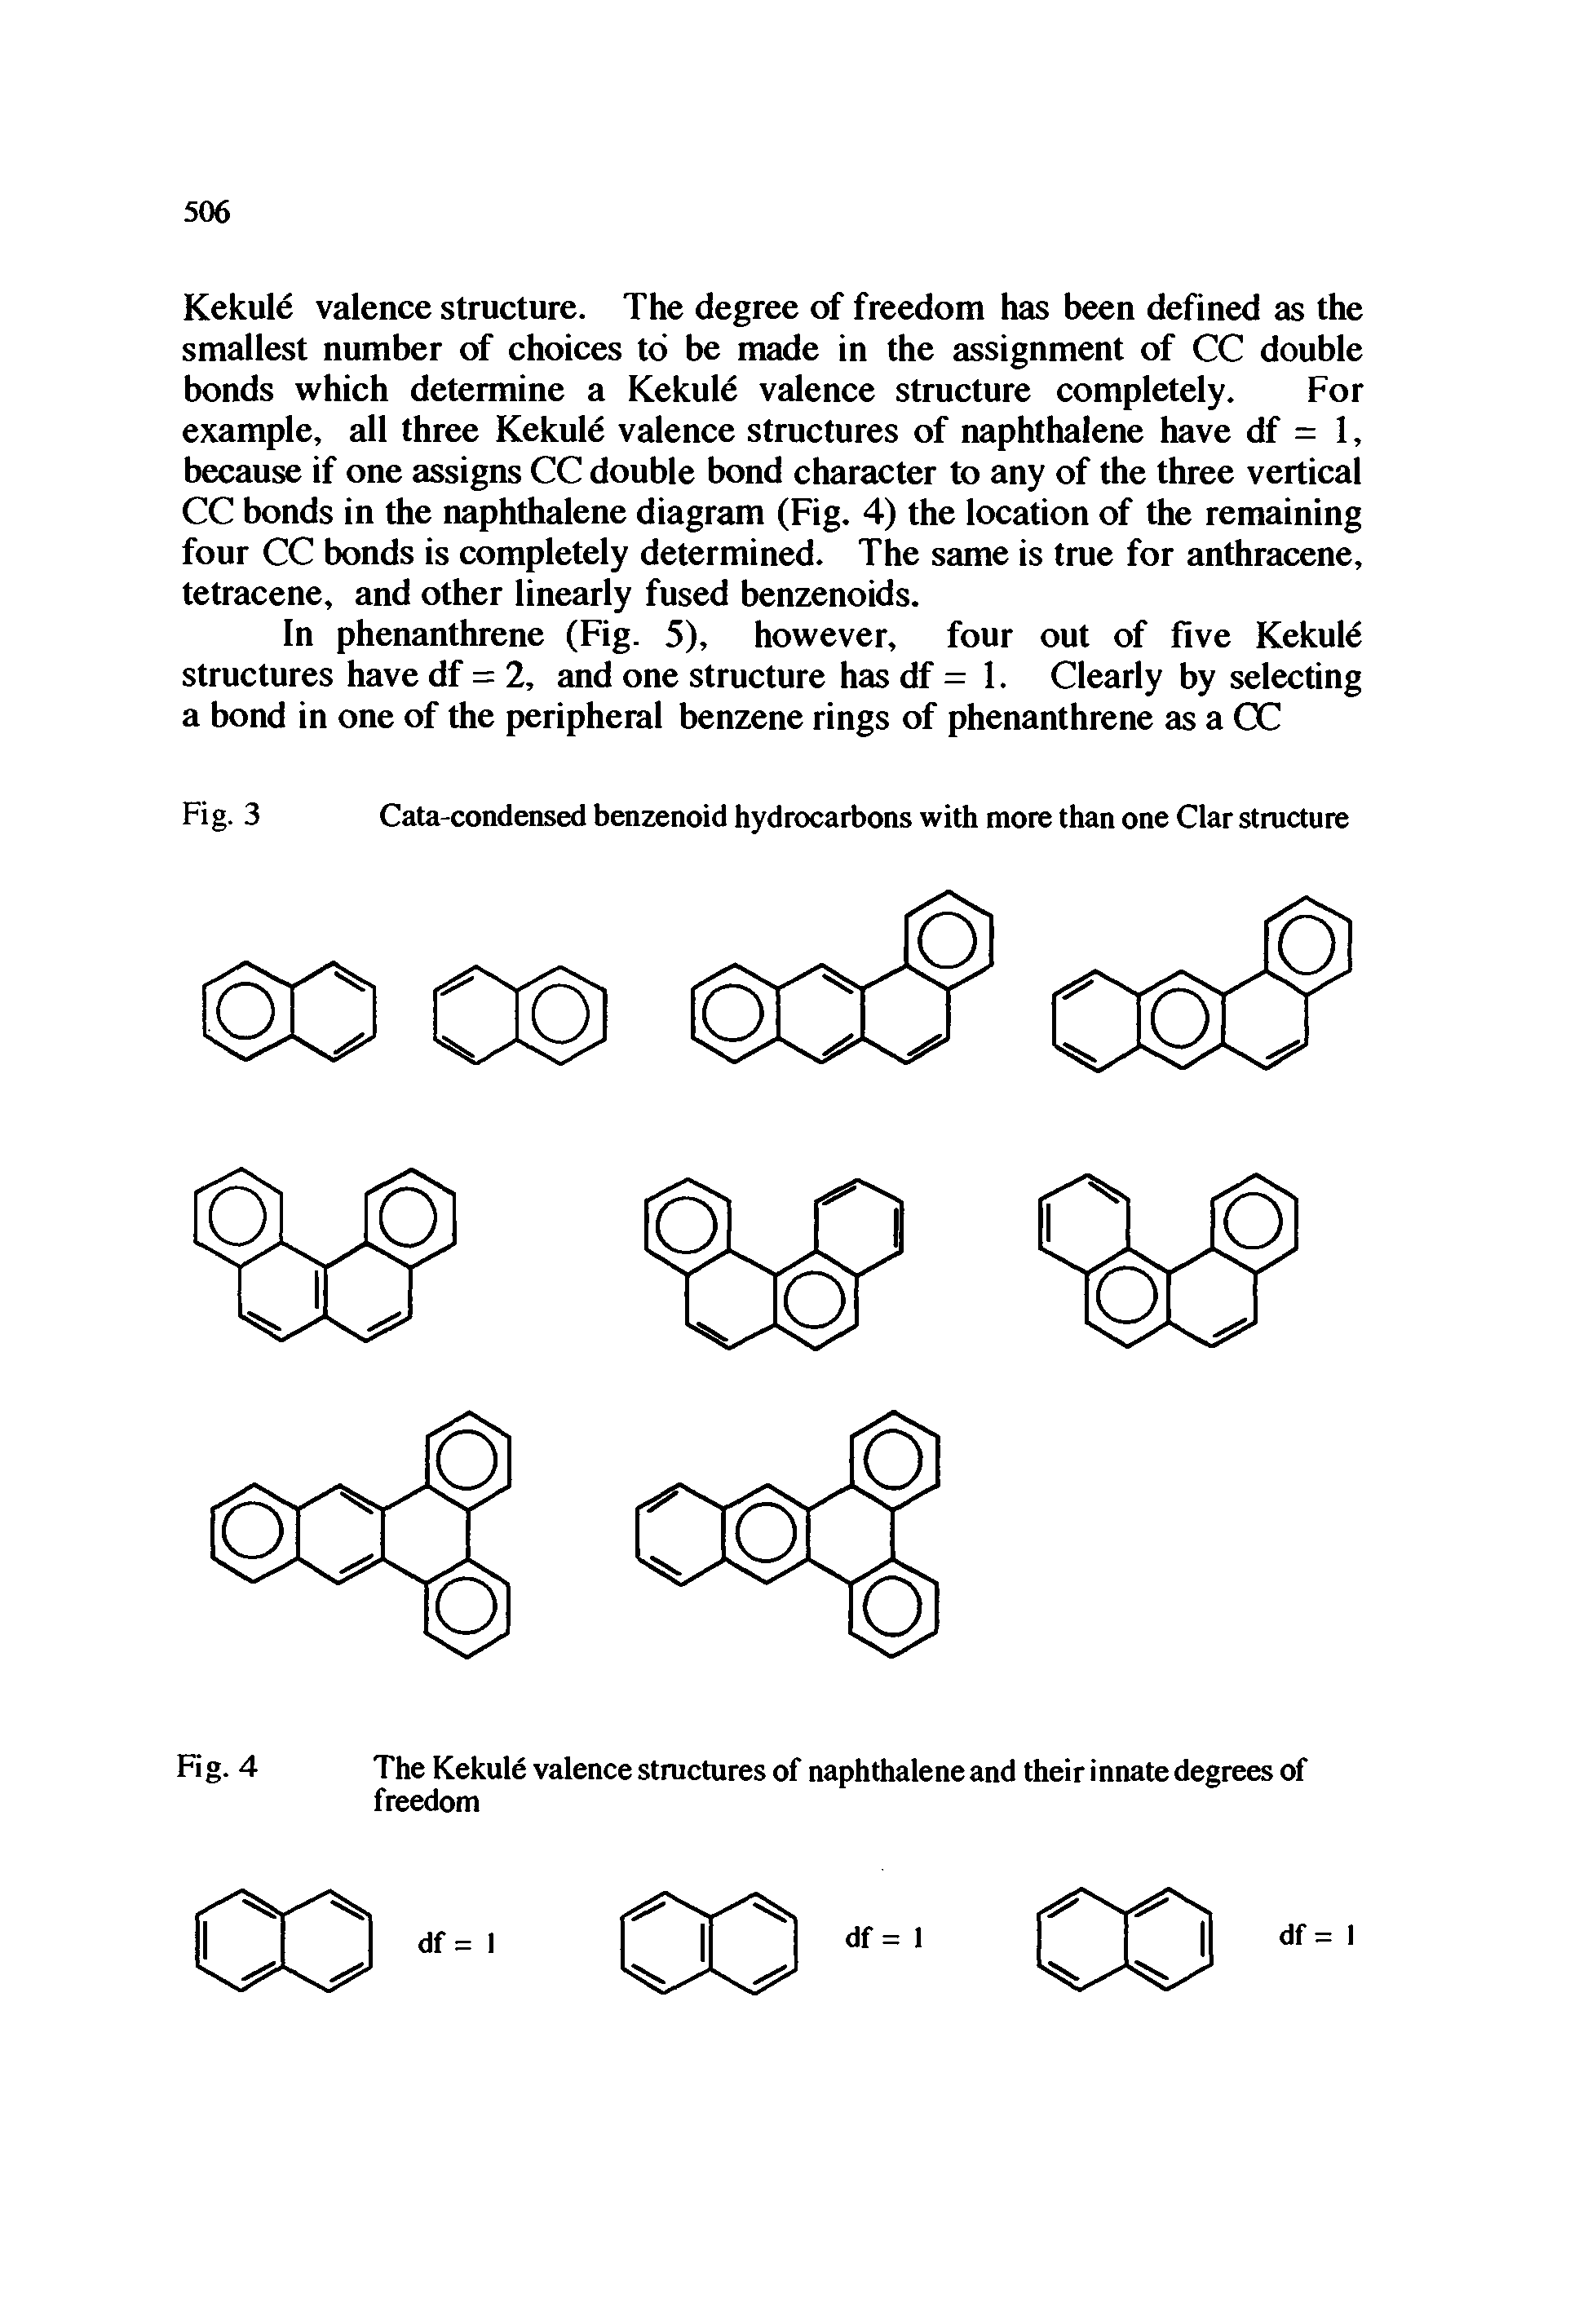 Fig. 3 Cata-condensed benzenoid hydrocarbons with more than one Clar structure...